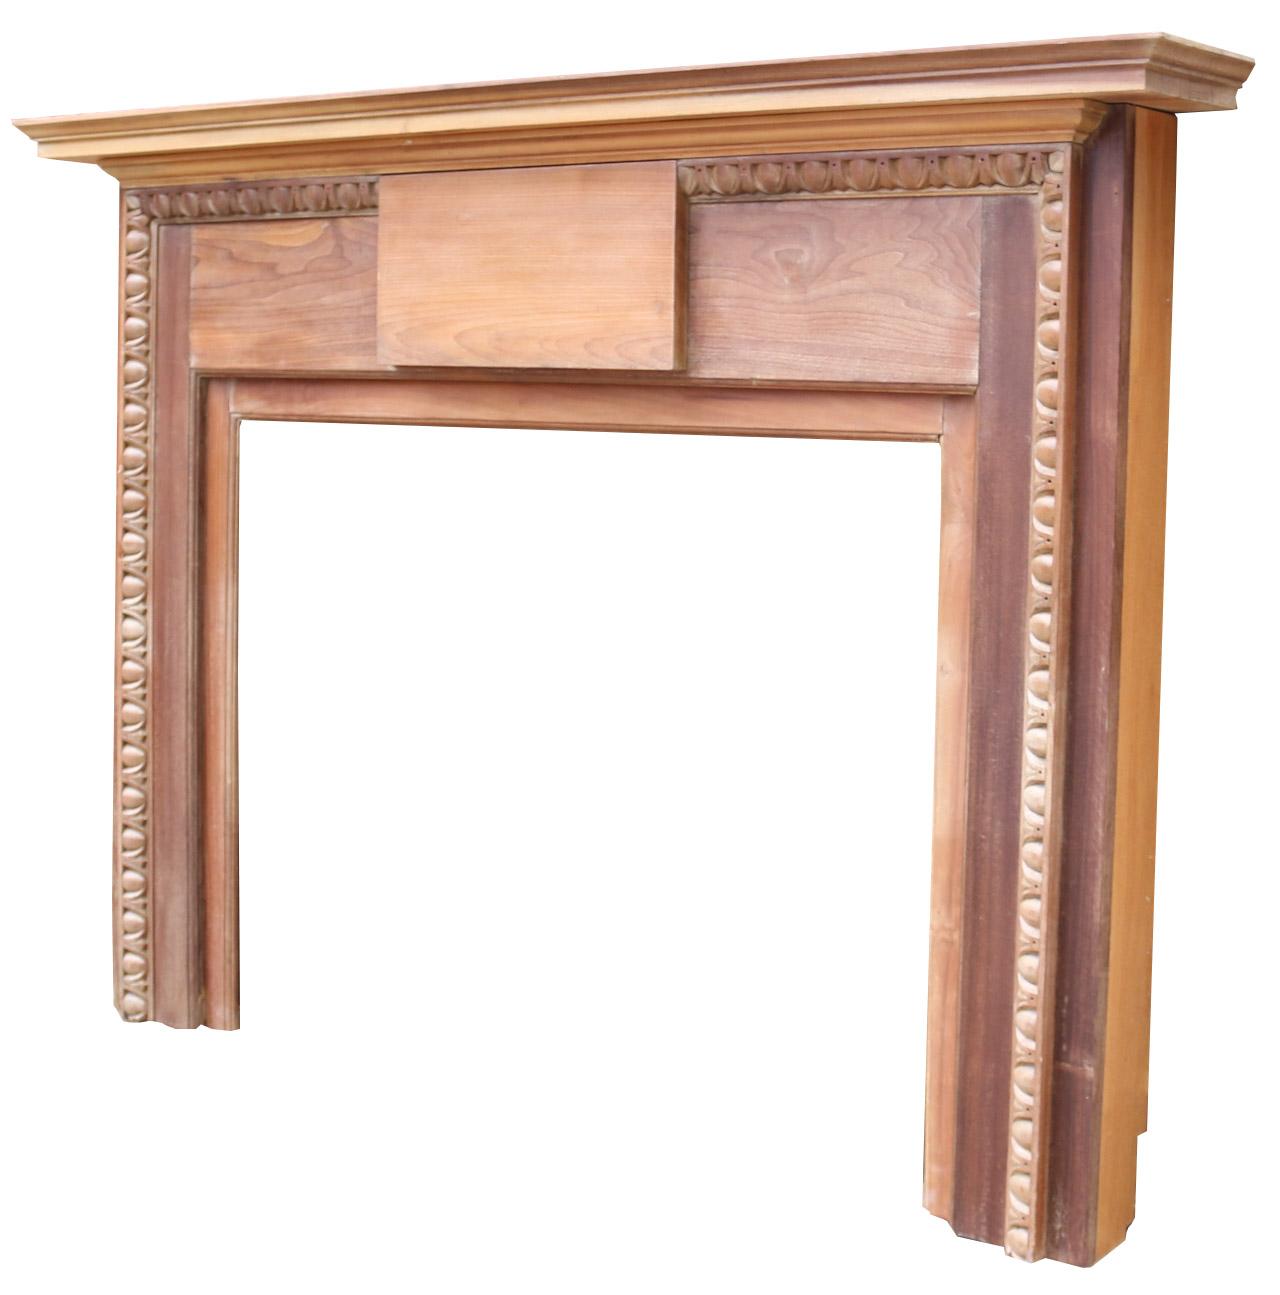 20th Century Antique English Timber Fire Surround For Sale